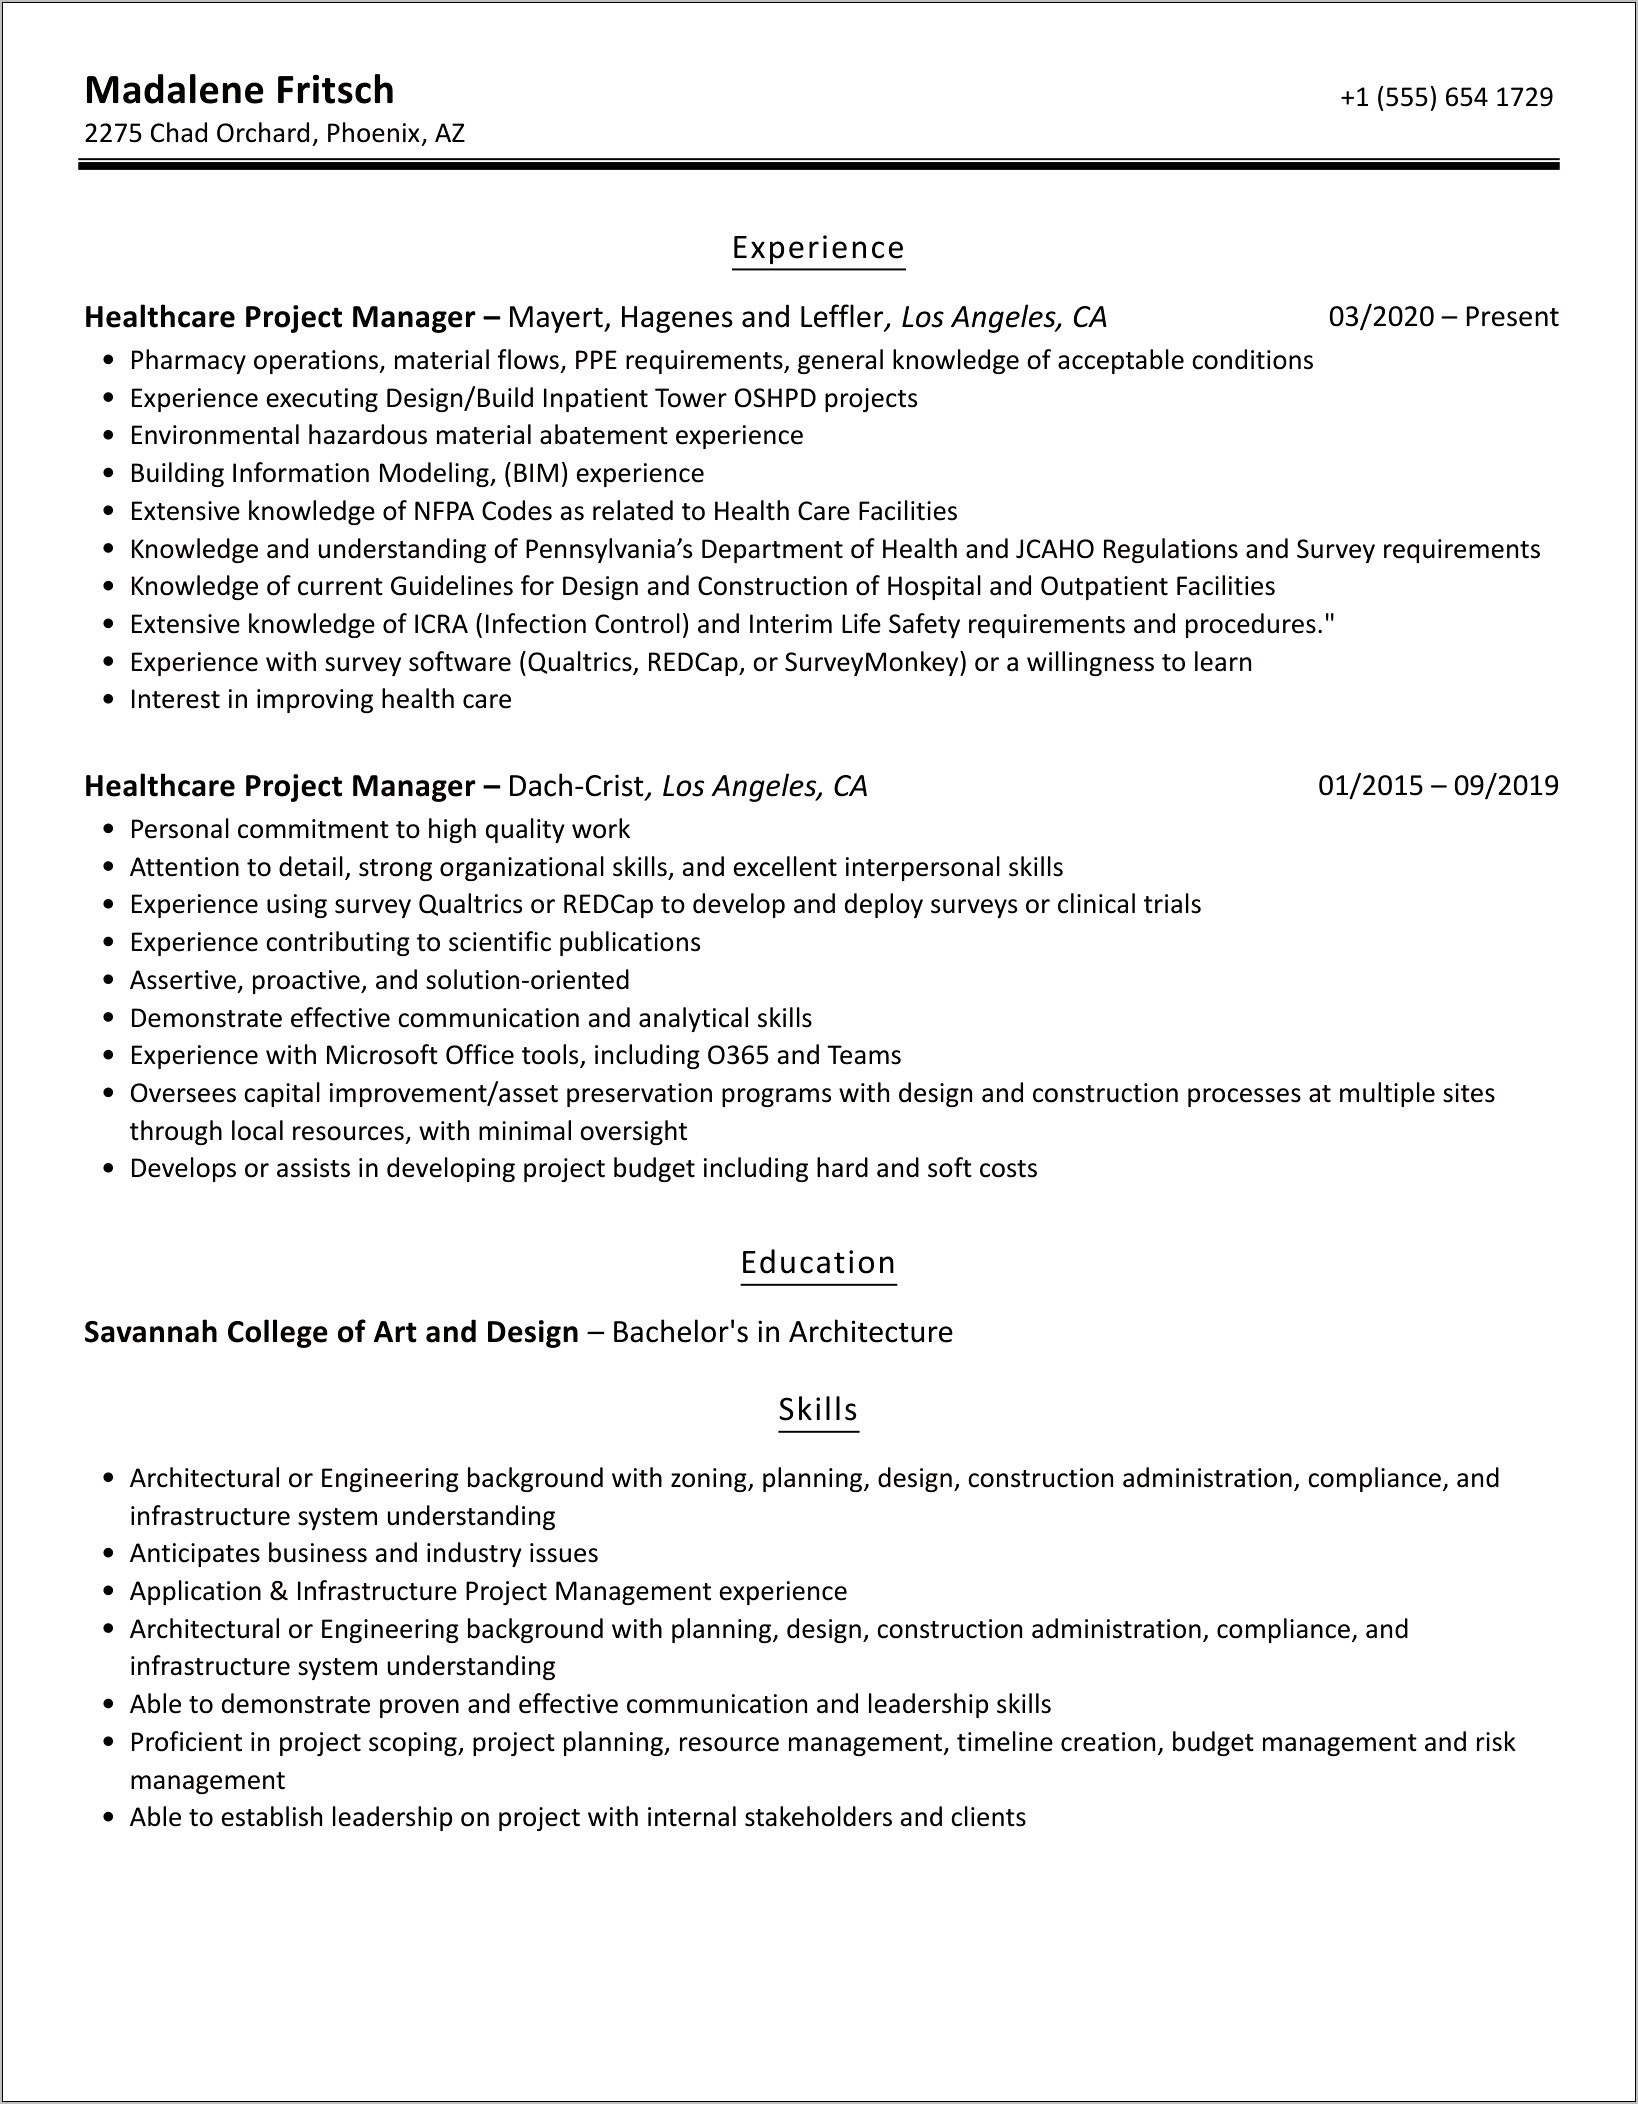 Healthcare Project Manager Resume Sample